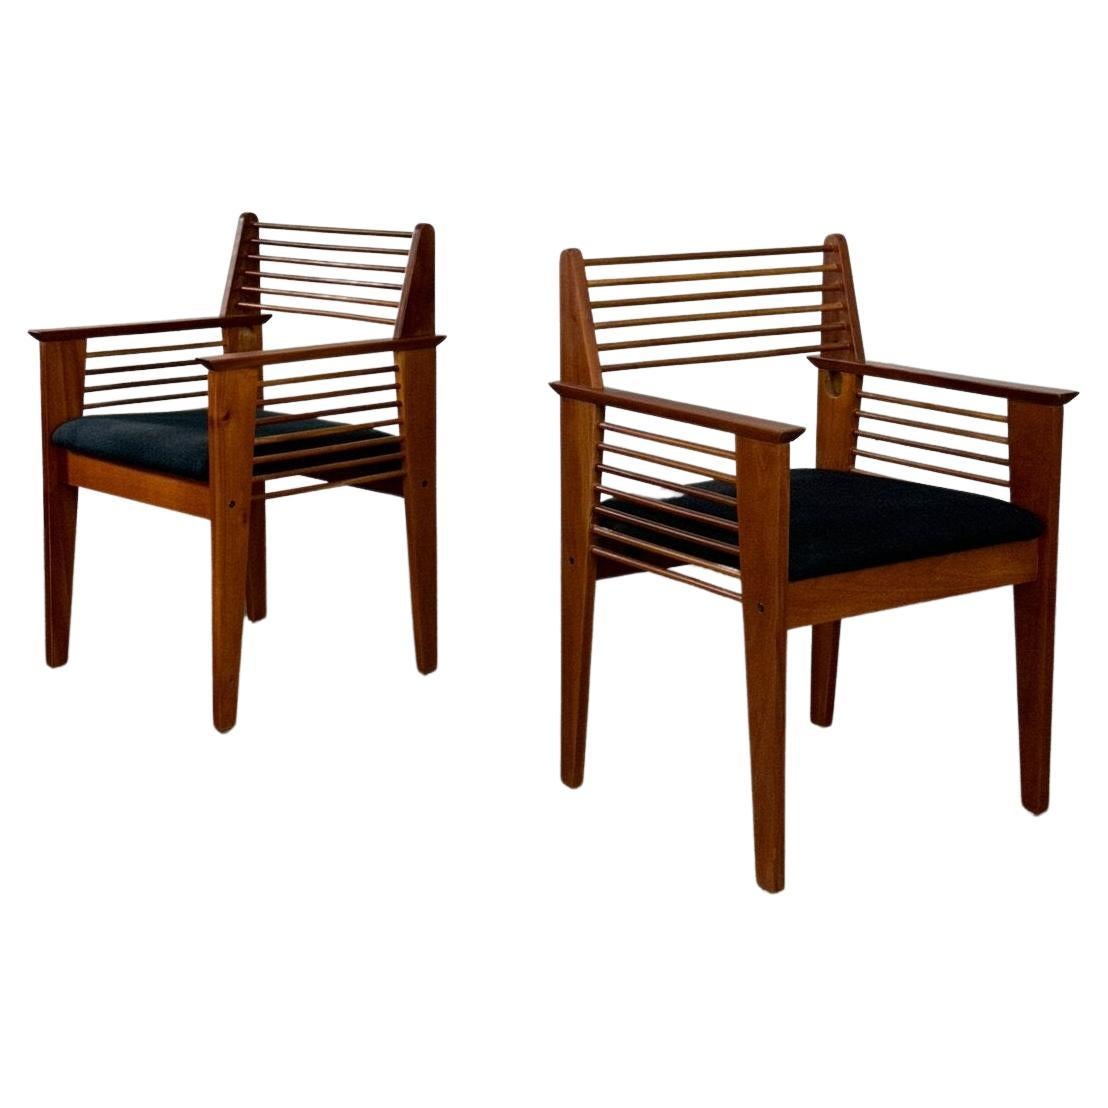 W22 D21 H32 SW19 SD19 SH18 AH25

Vintage side chairs fabricated in solid mahogany. The frames have been fully restored and both chairs are structurally sound. Chairs have original seats that should be reupholstered. Price is for the pair as